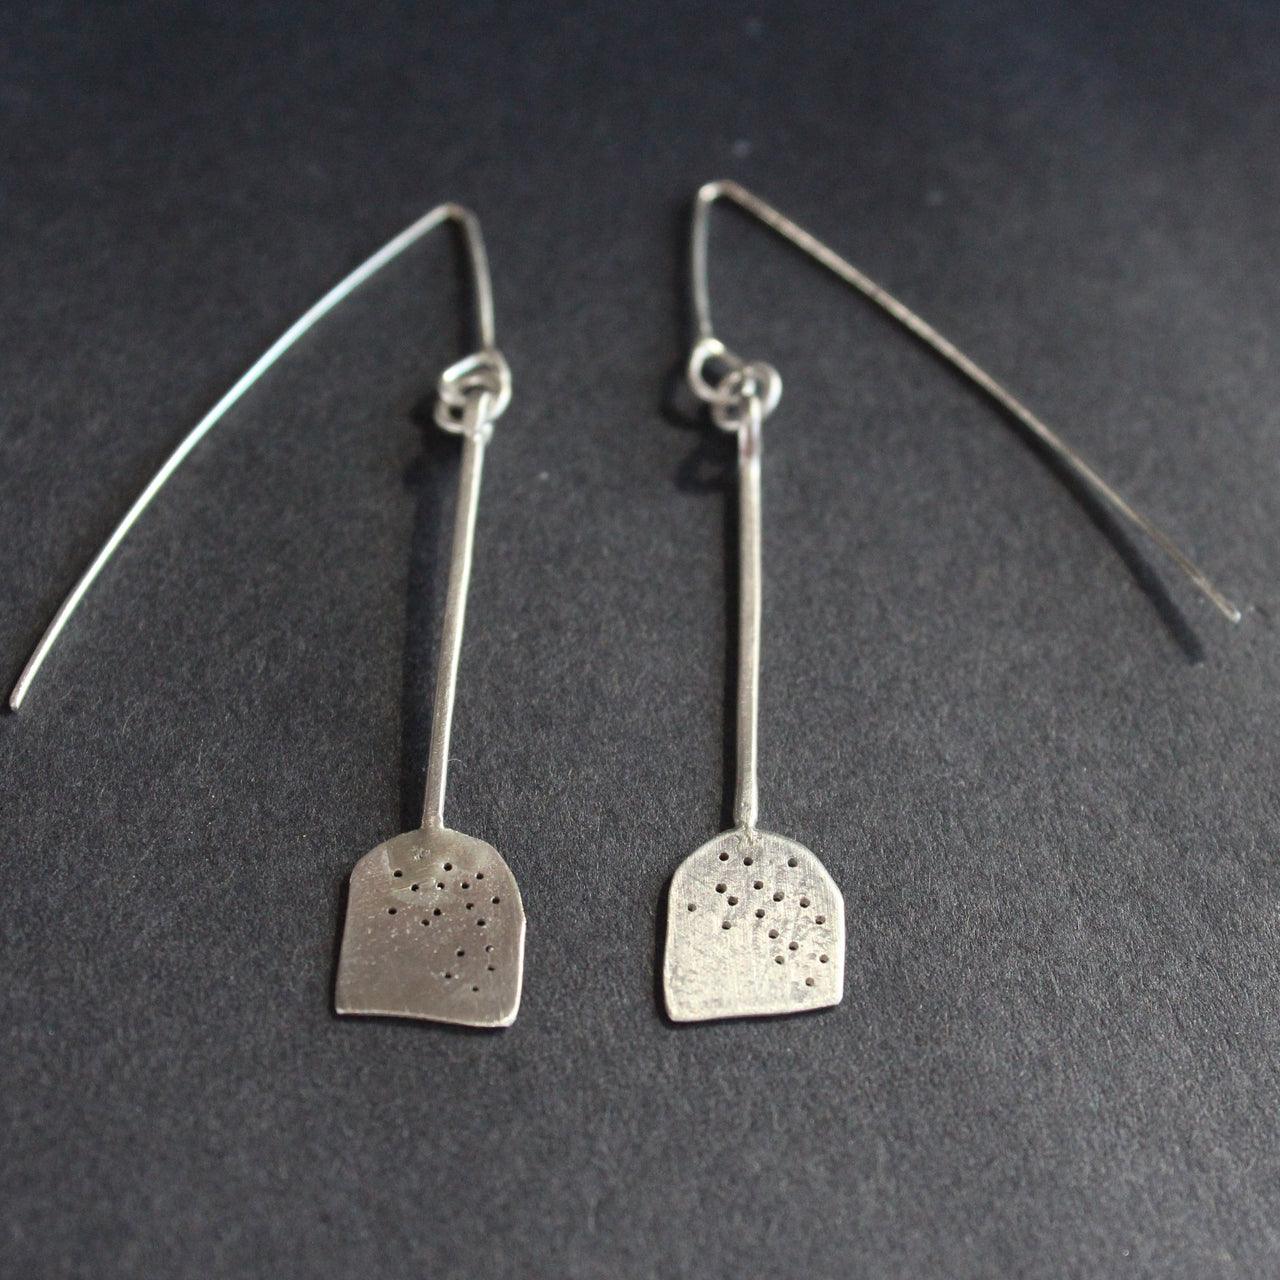 a pair of silver paddle shaped earrings by jewellery lizzie weir of Anatole Design.